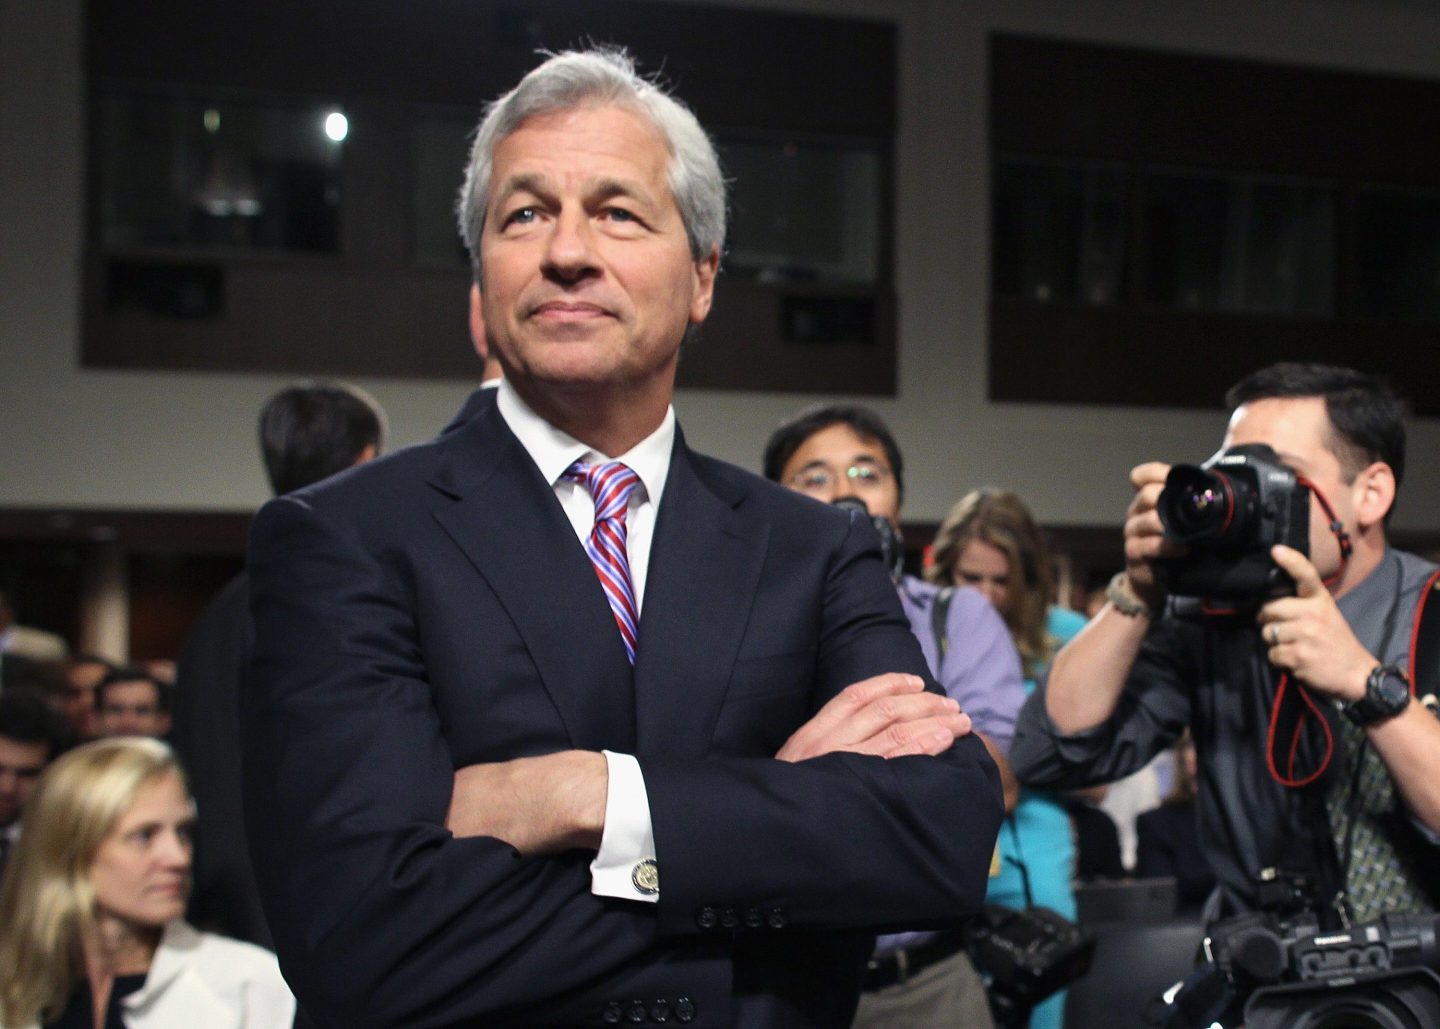 President and CEO of JPMorgan Chase Co. Jamie Dimon arrives to testify before a Senate Banking Committee hearing on Capitol Hill June 13, 2012 in Washington, DC.